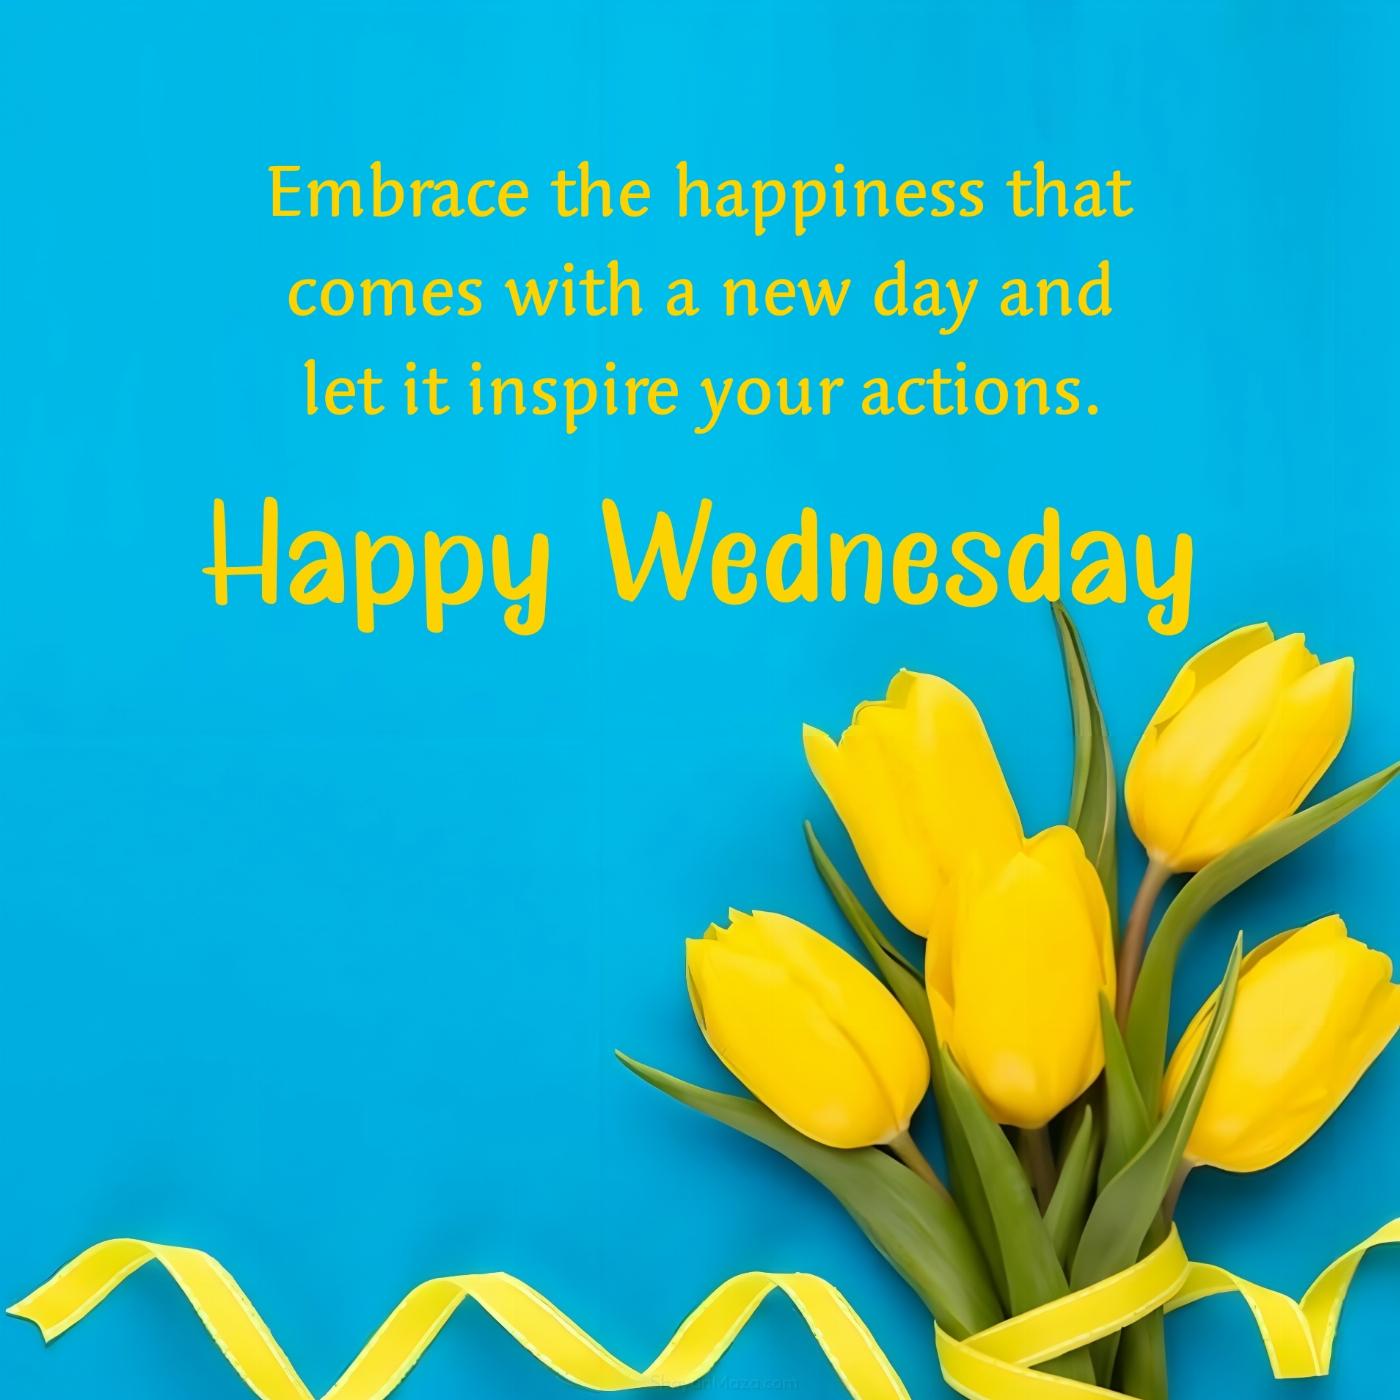 Happy Wednesday! Embrace the happiness that comes with